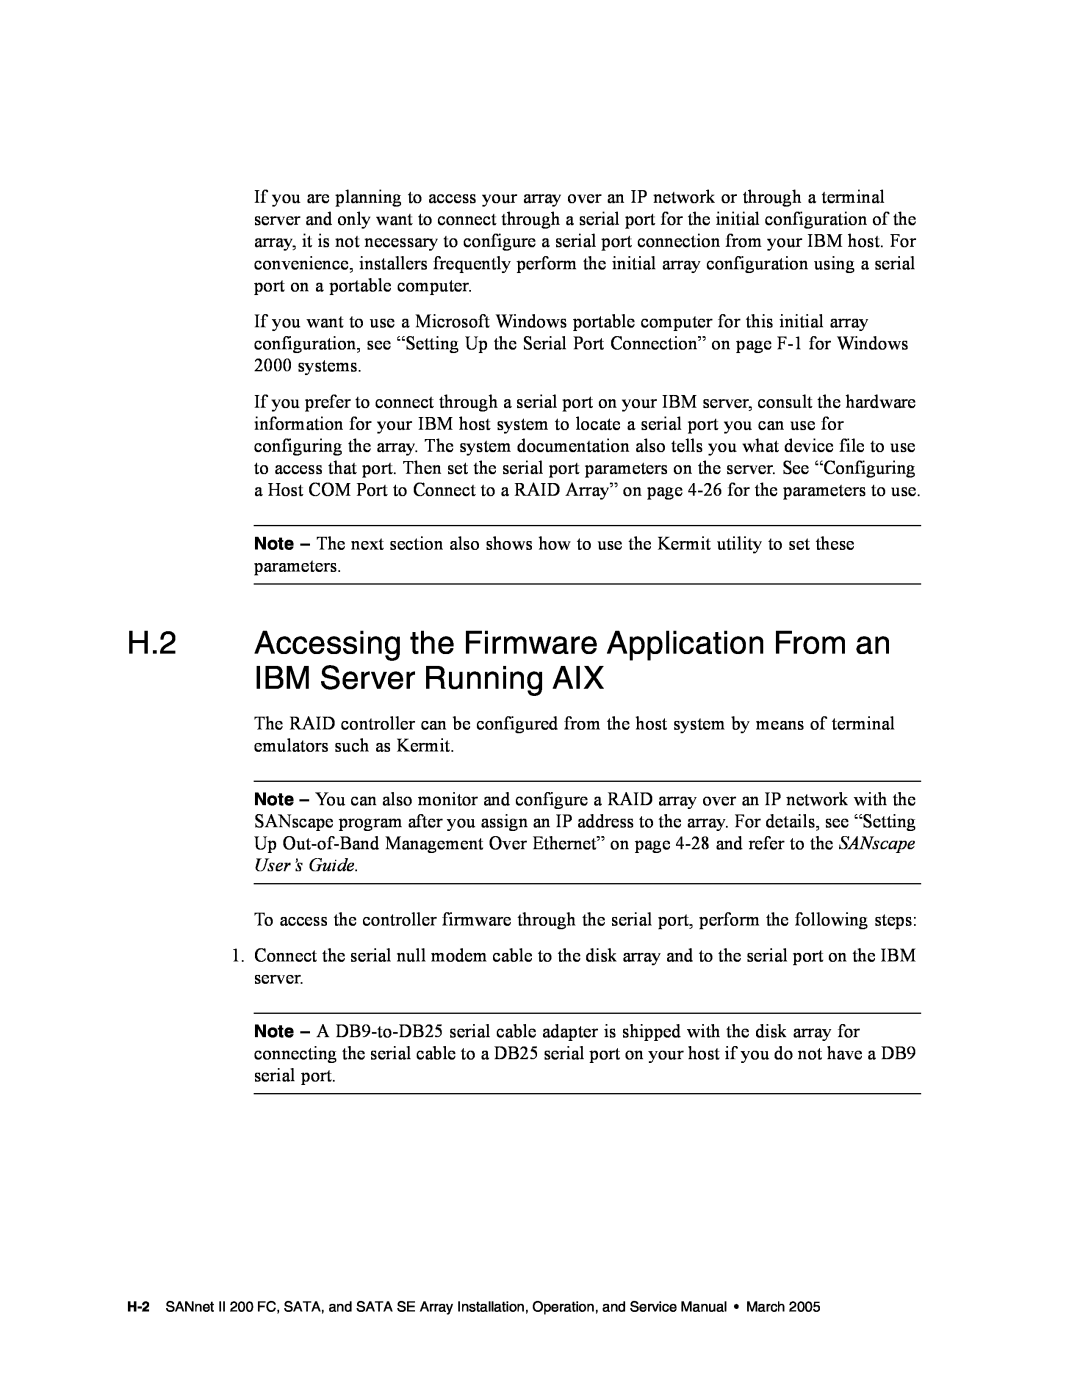 Dot Hill Systems II 200 FC service manual H.2 Accessing the Firmware Application From an IBM Server Running AIX 